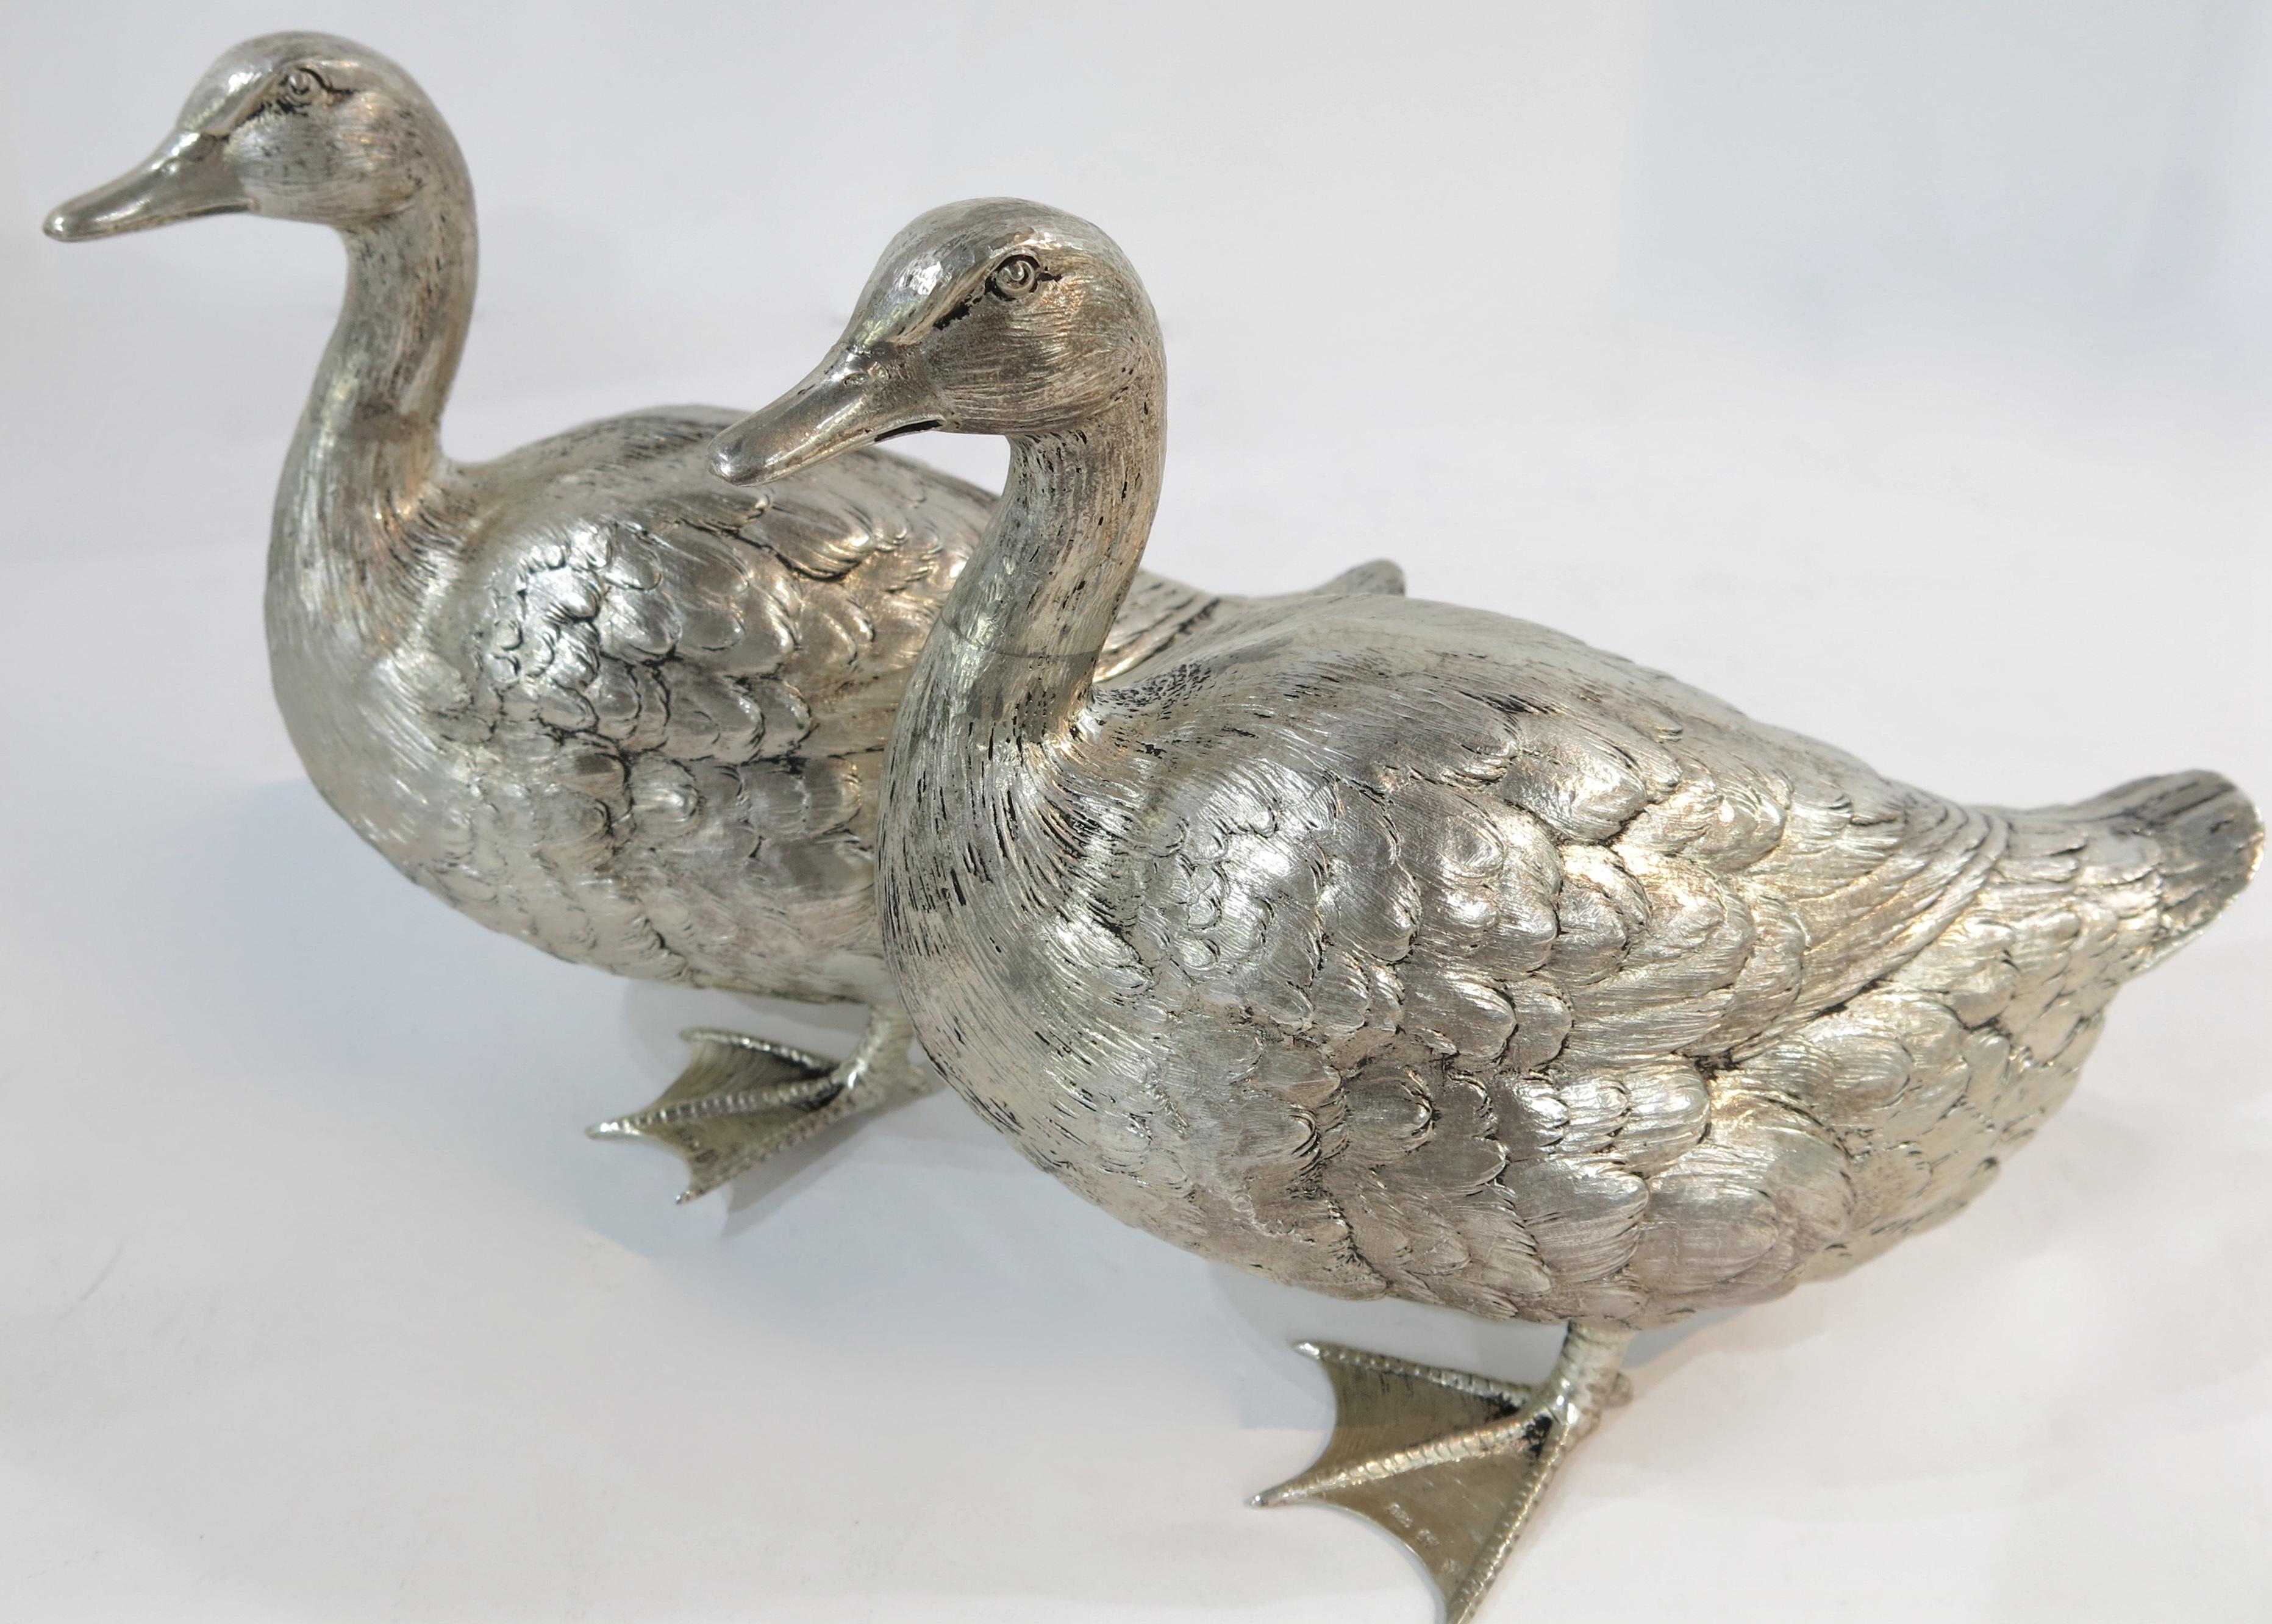 A good quality pair of sterling silver ducks. Each duck is marked with the German half moon and crown mark and 925 on the webbing of their feet.
These ducks are solid silver, not weighted or filled.
Measures: Approximate 6